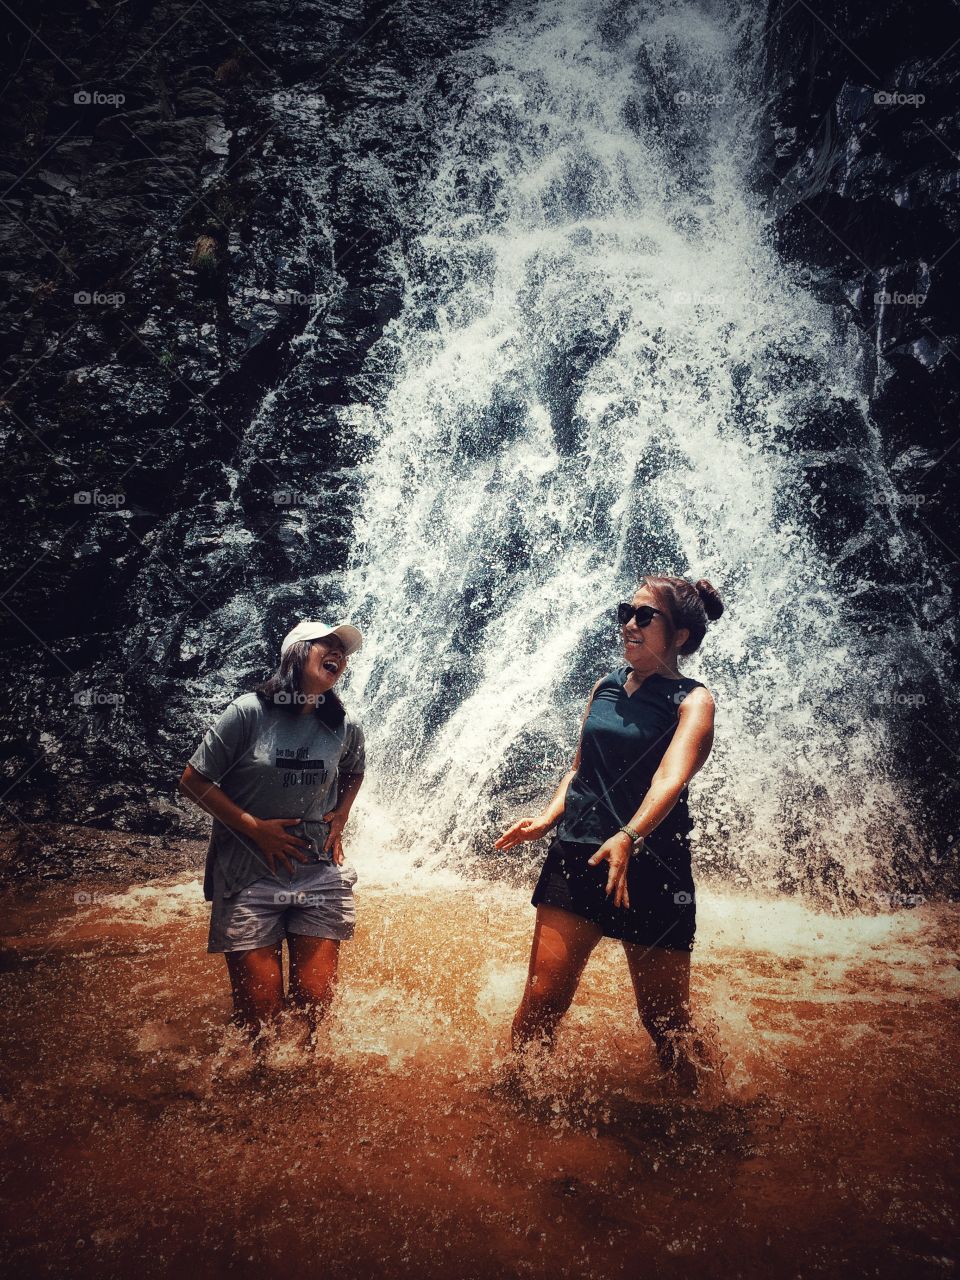 Happy water fall with my friends 